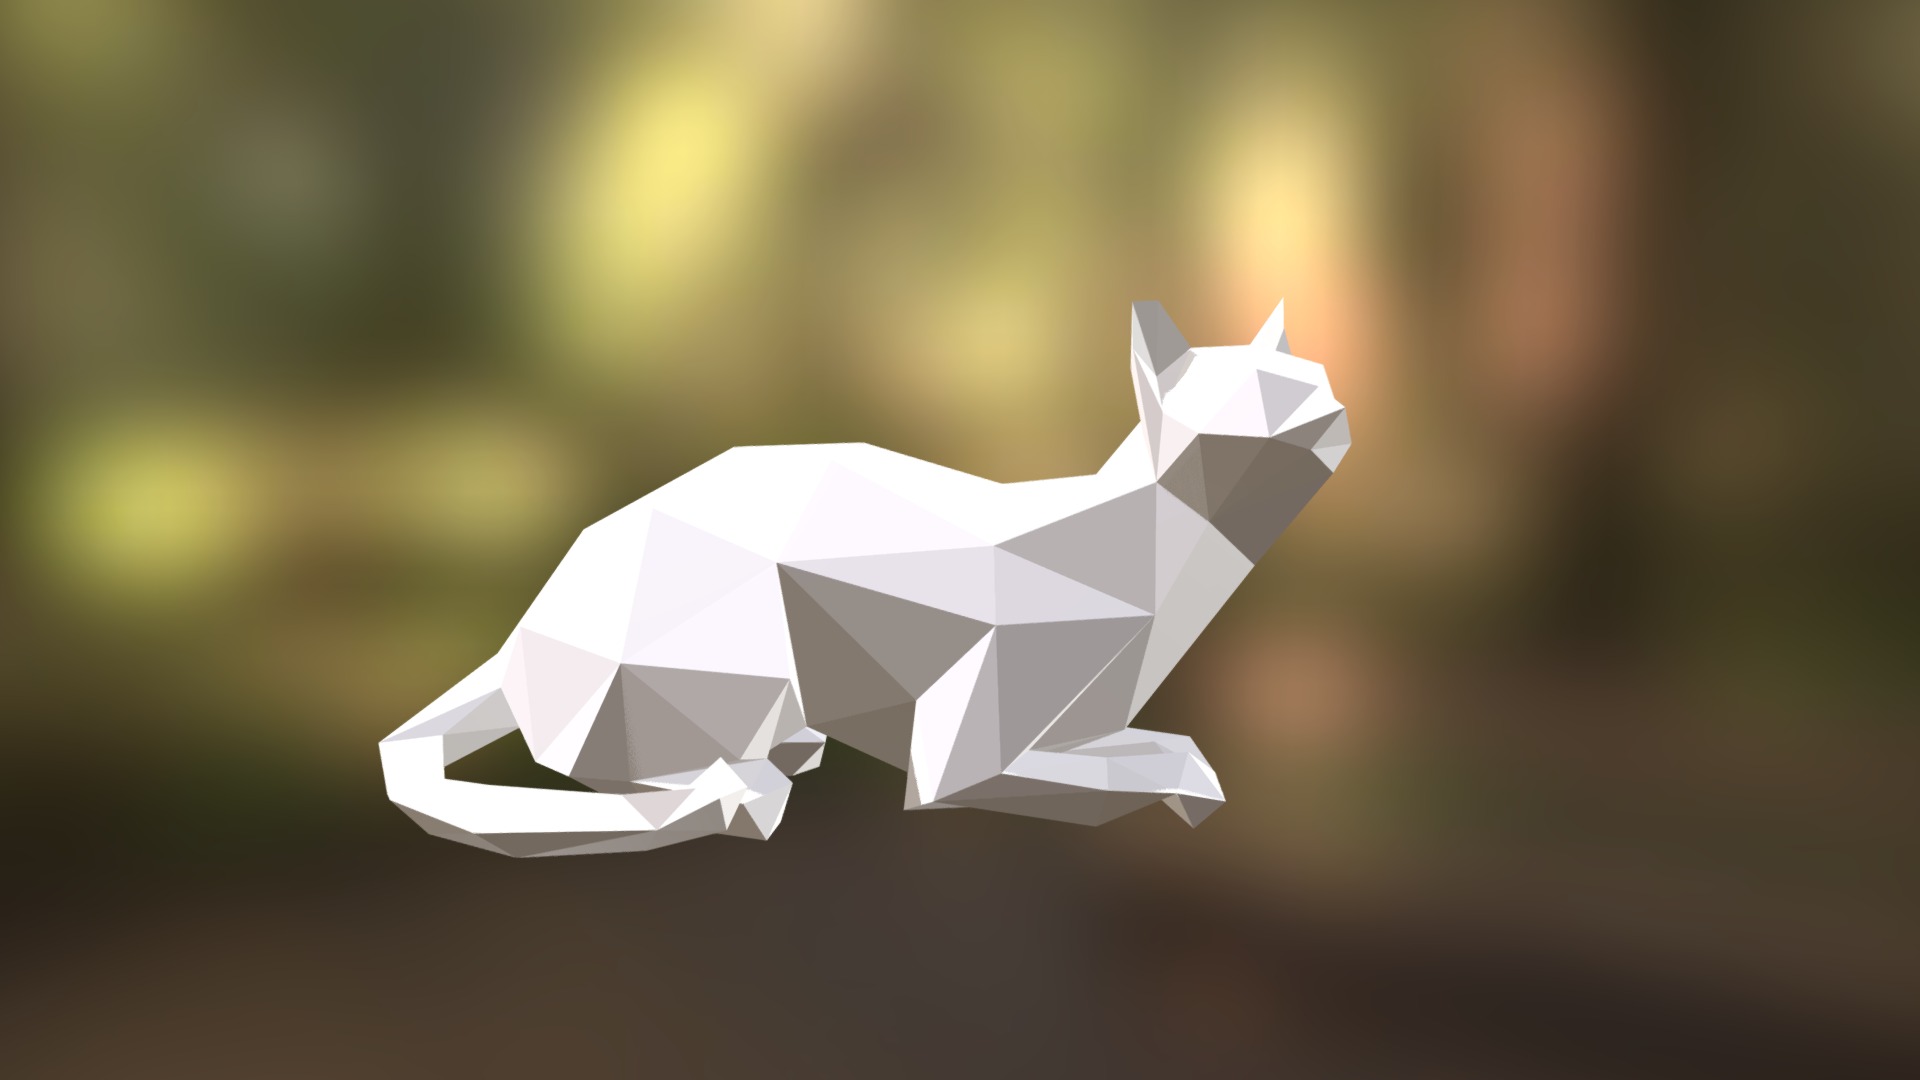 Low Poly 3D model for 3D printing. Cat Low Poly sculpture.  You can find this model for 3D printing in my shop:  -link removed-  Reference model: http://www.cadnav.com - Cat 2 Low Poly model for 3d printing 3d model